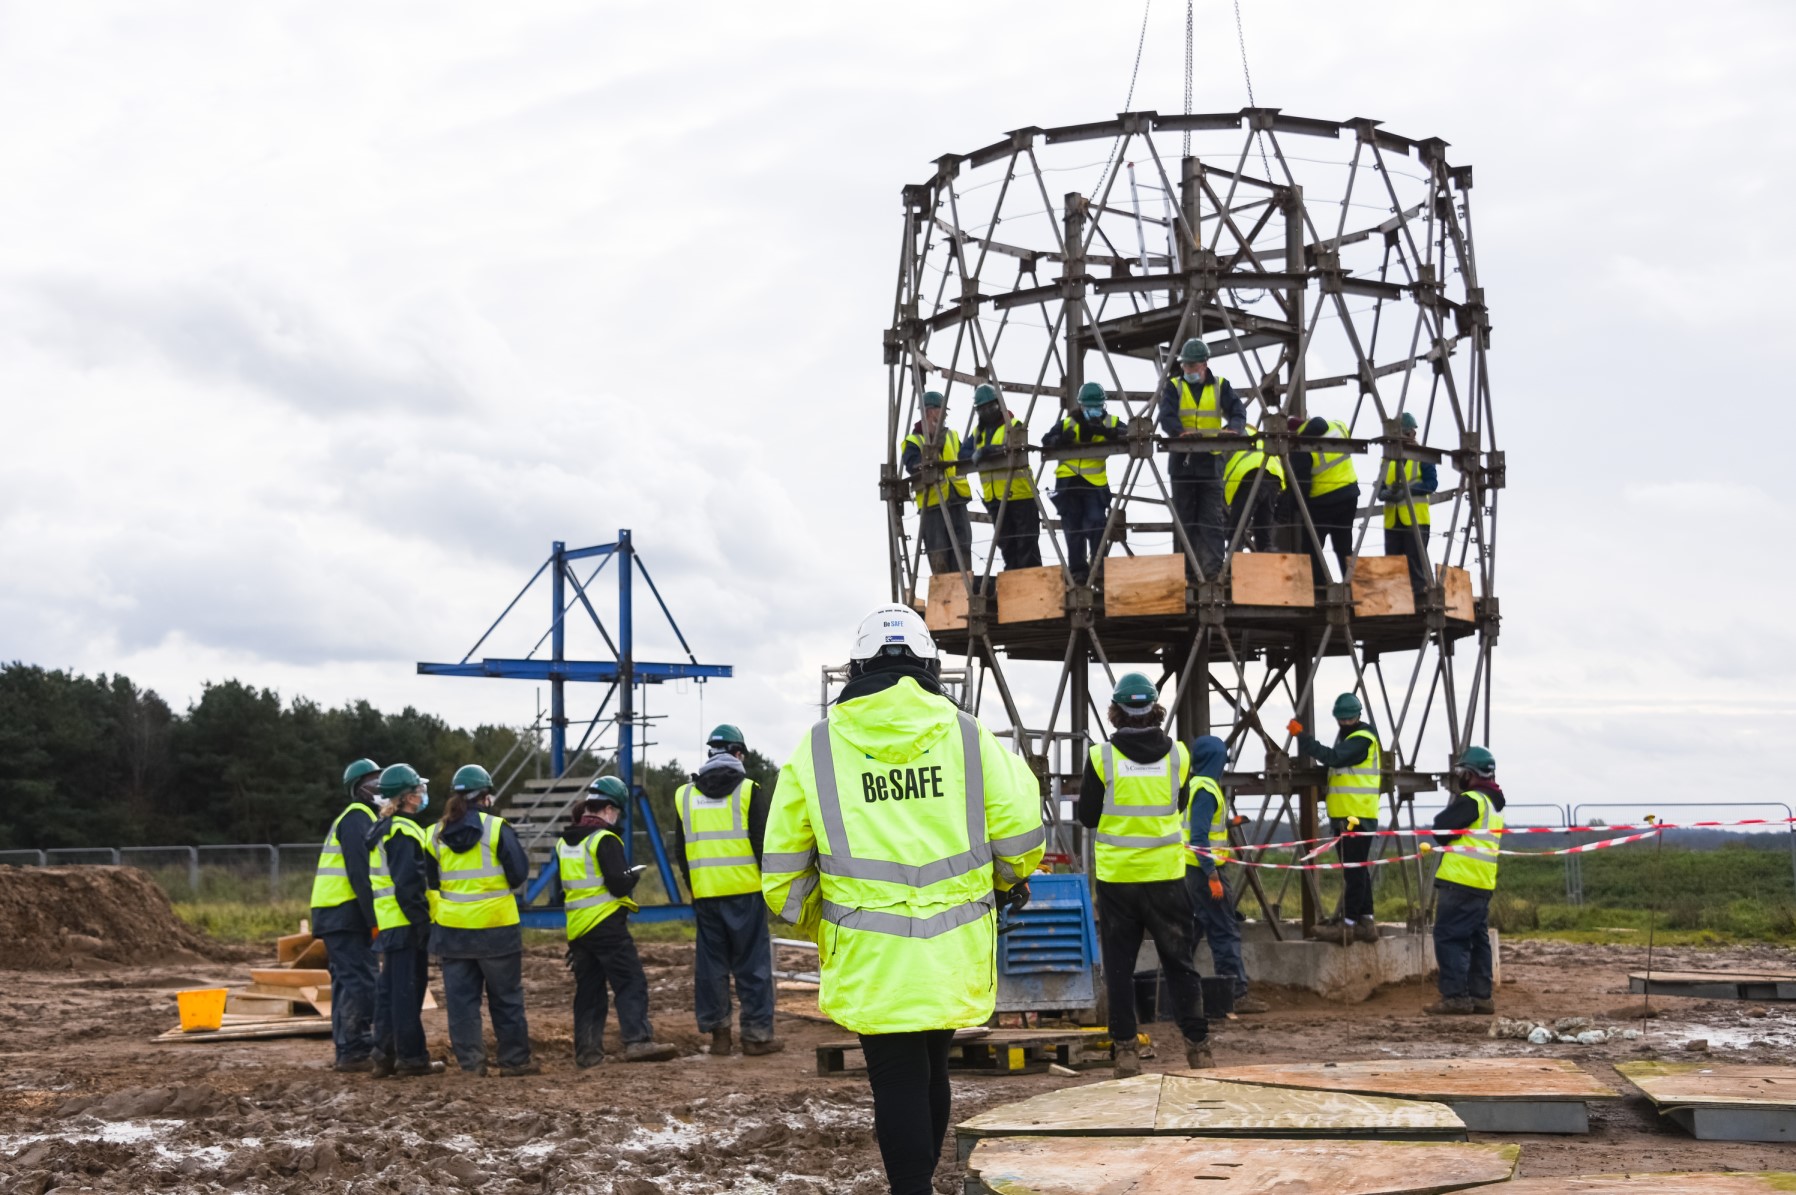 Students from the University of Southampton and the Gherkin at Constructionarium